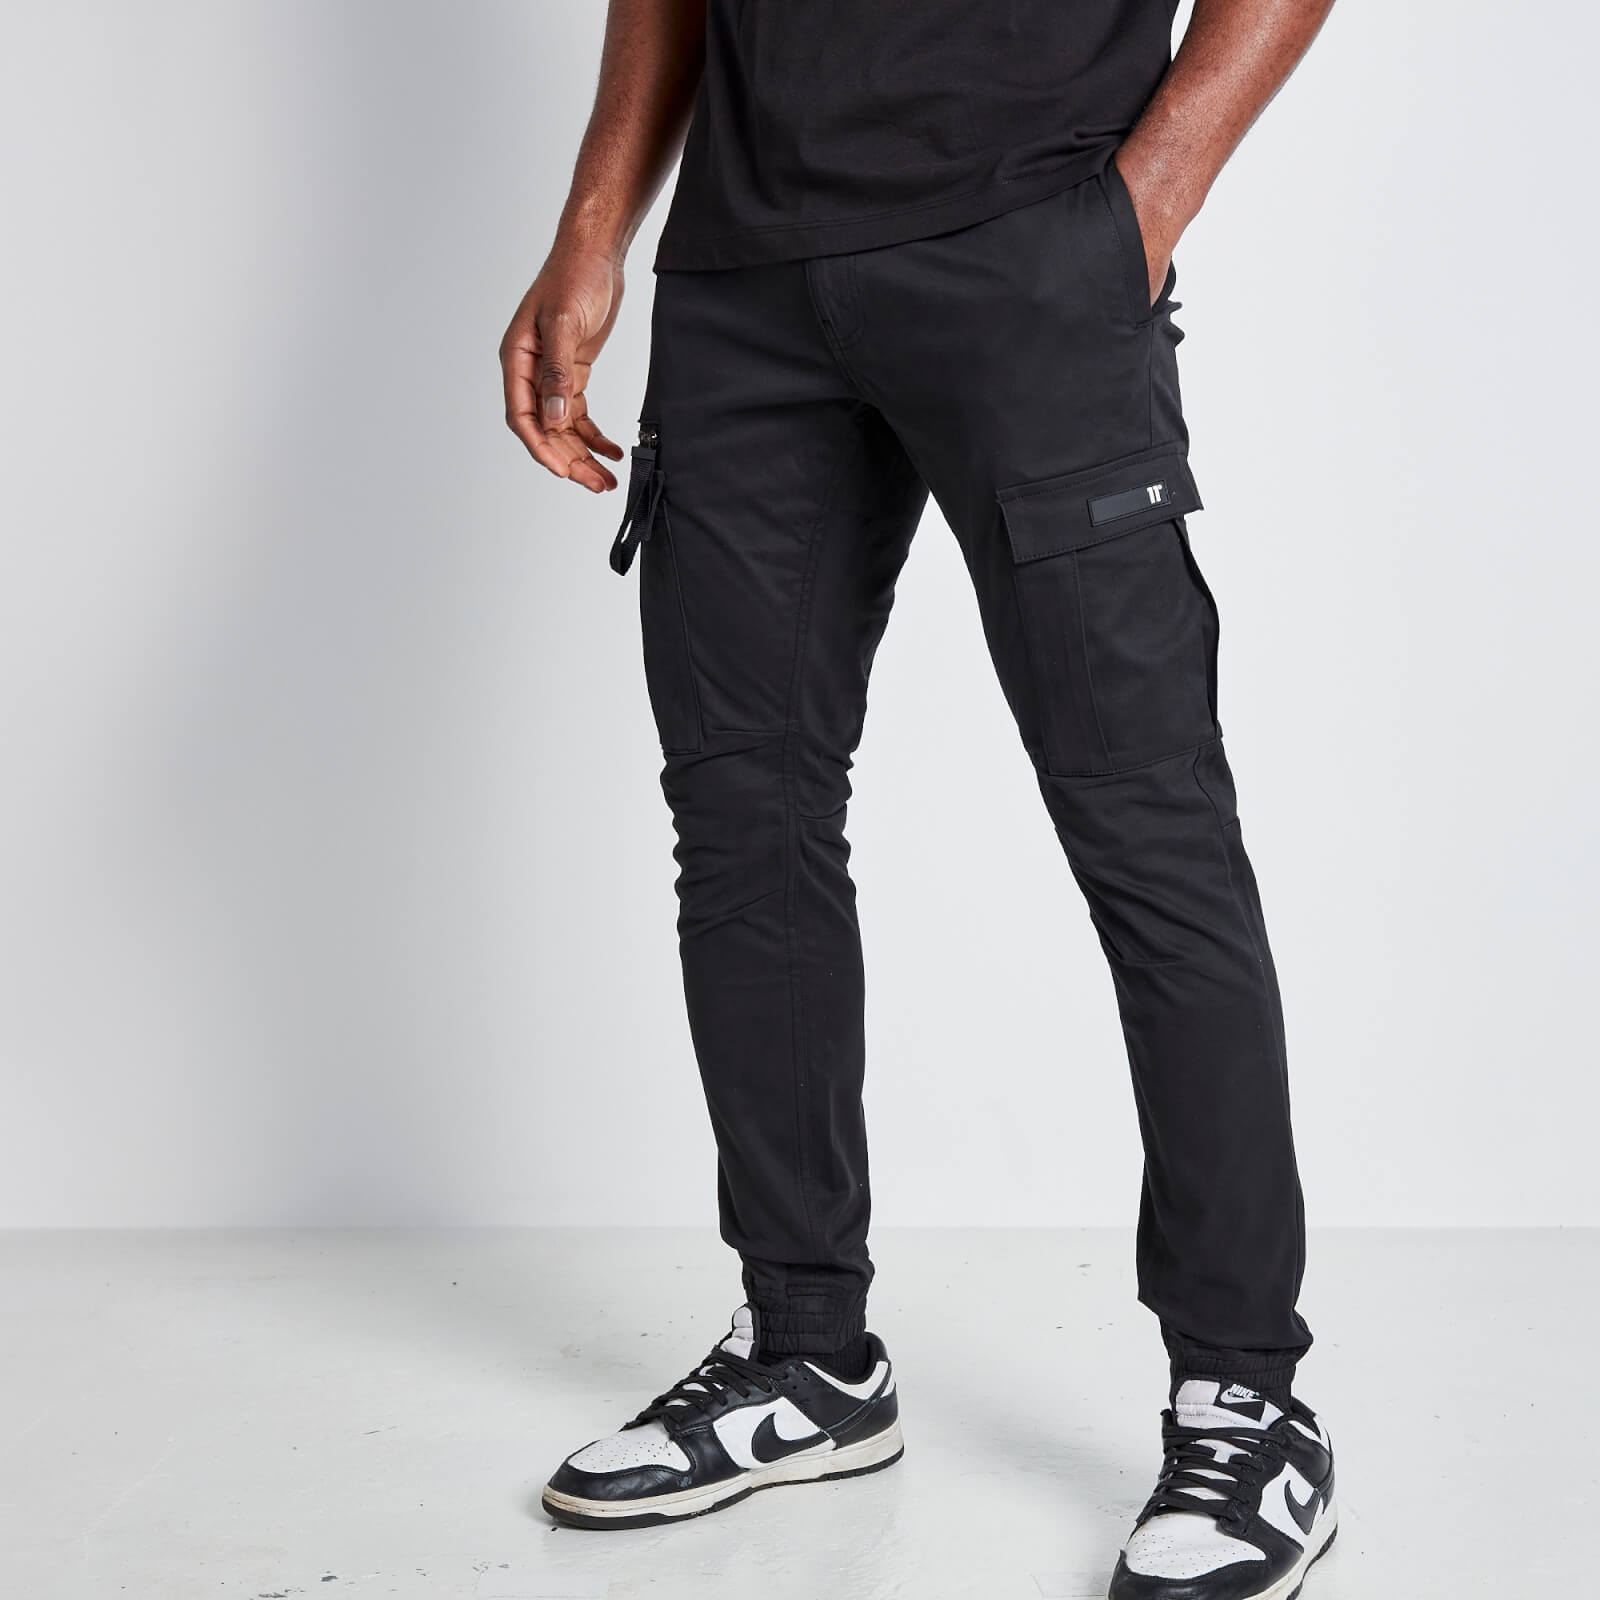 11 Degrees Cargo Pants - Black - XL from 11 Degrees